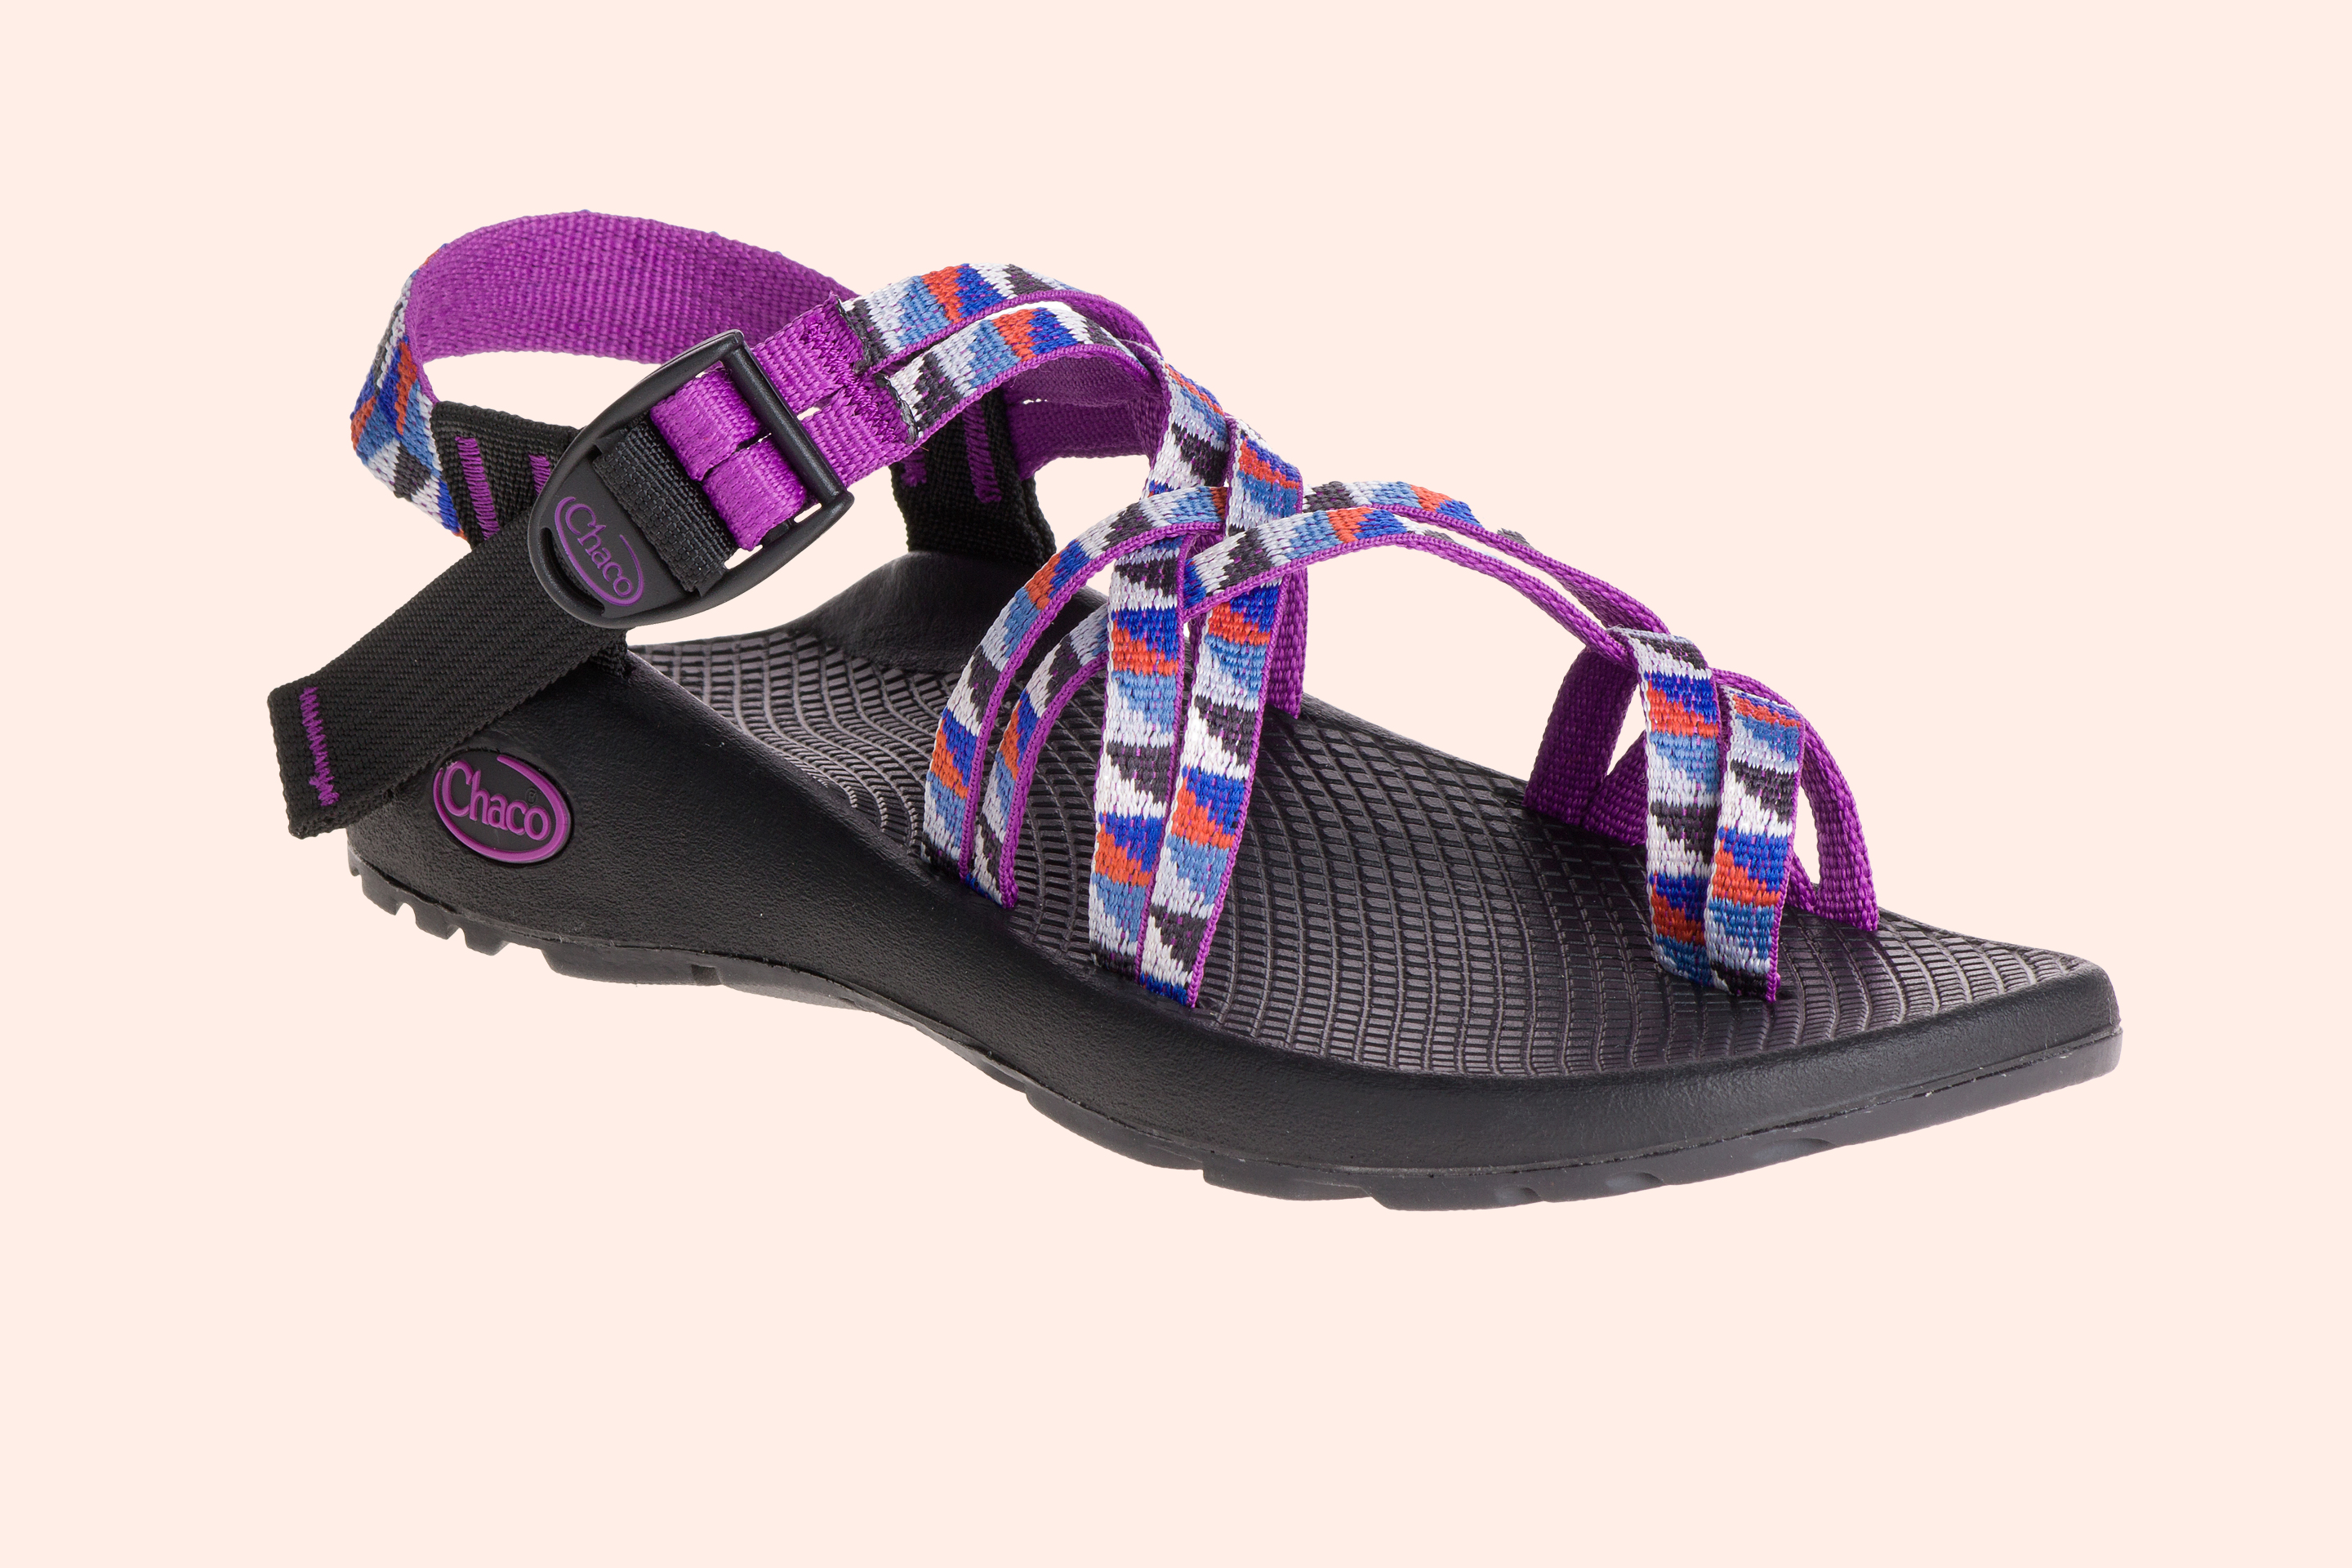 Chaco ZX/2 Classic ($105)